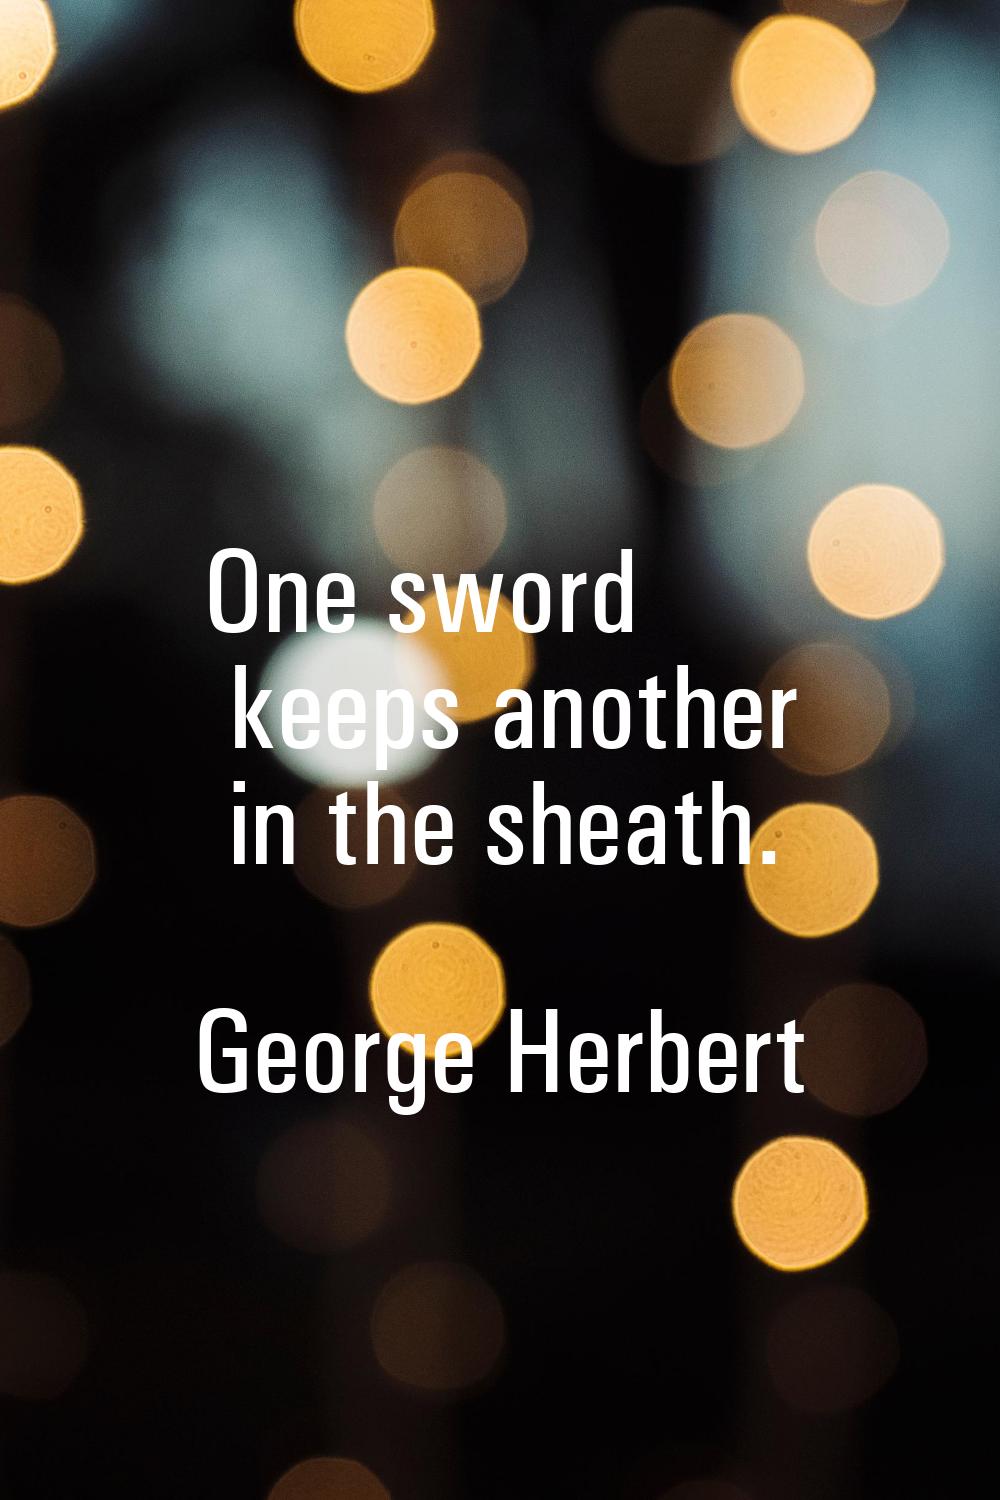 One sword keeps another in the sheath.